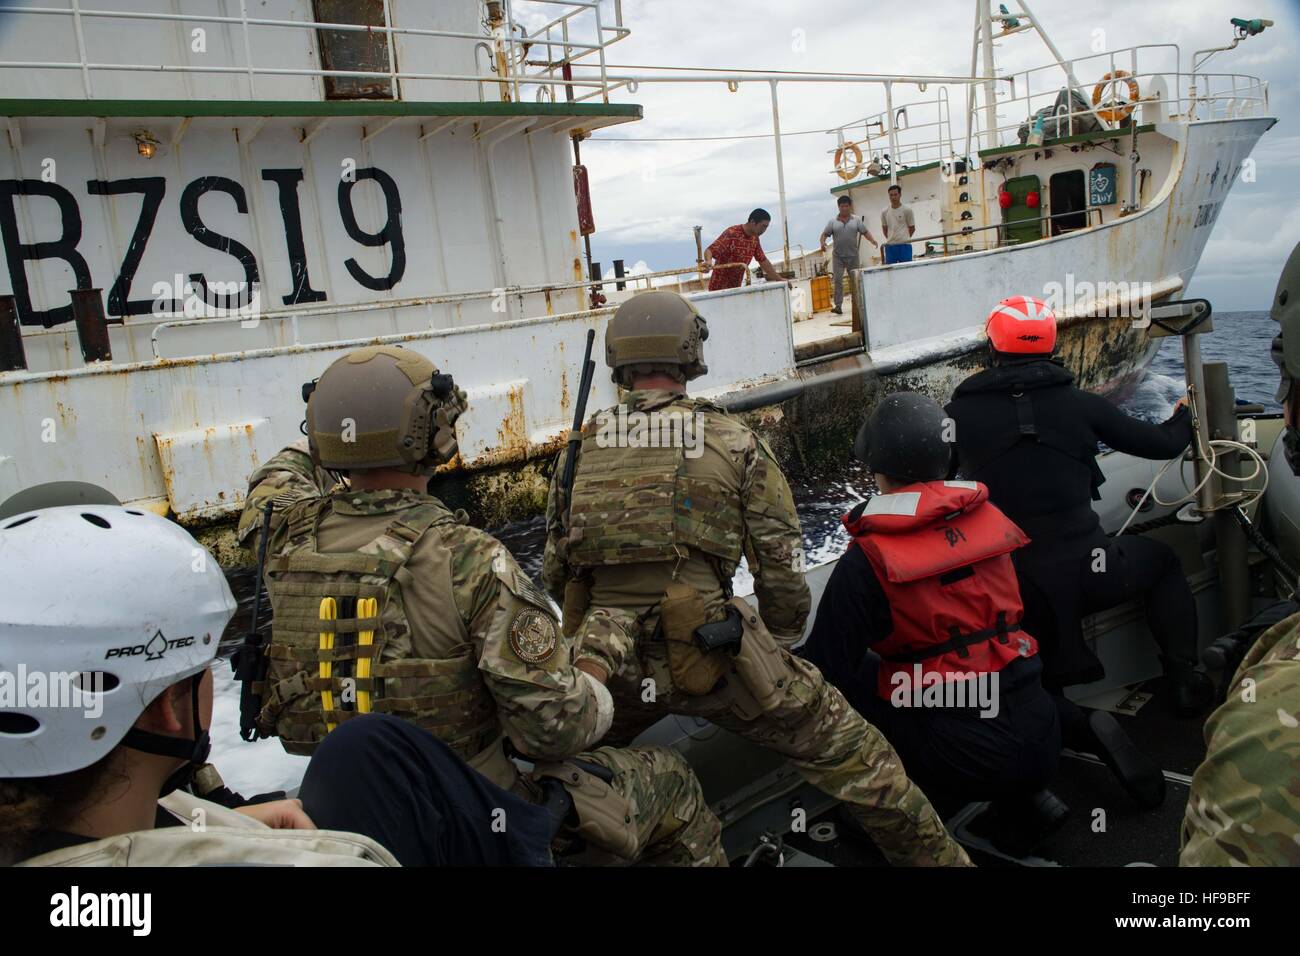 U.S. soldiers and U.S. Coast Guard officers approach a Chinese fishing vessel during an Oceania Maritime Security Initiative mission November 29, 2016 in the Pacific Ocean. Stock Photo